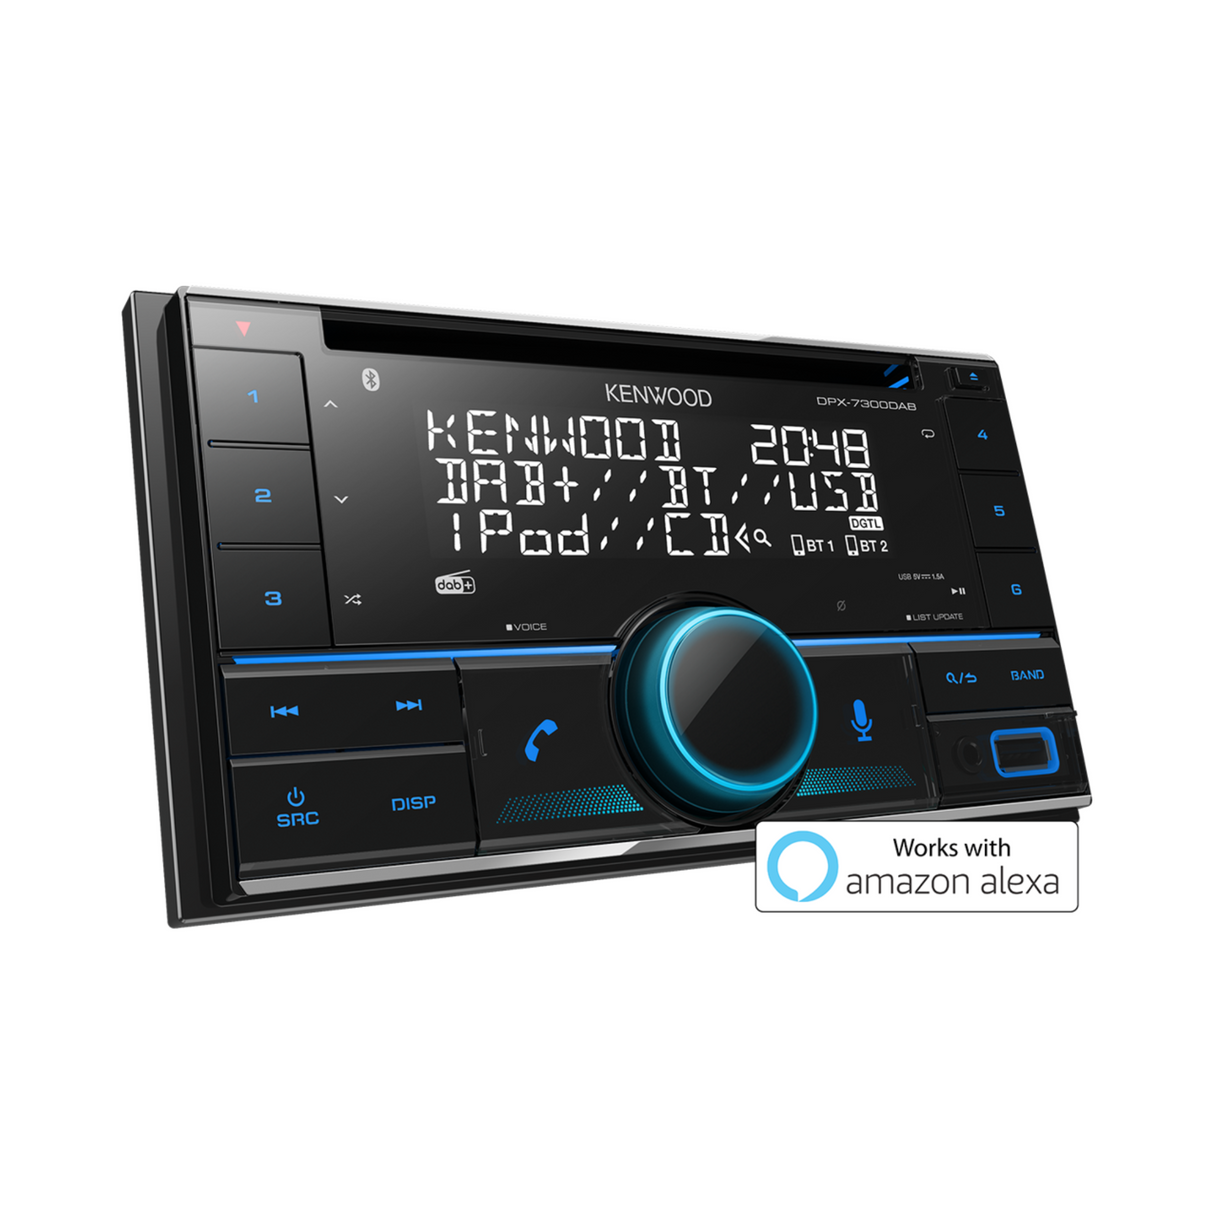 Kenwood DPX-7300DAB Car Stereo with Bluetooth Handsfree DAB and Amazon Alexa